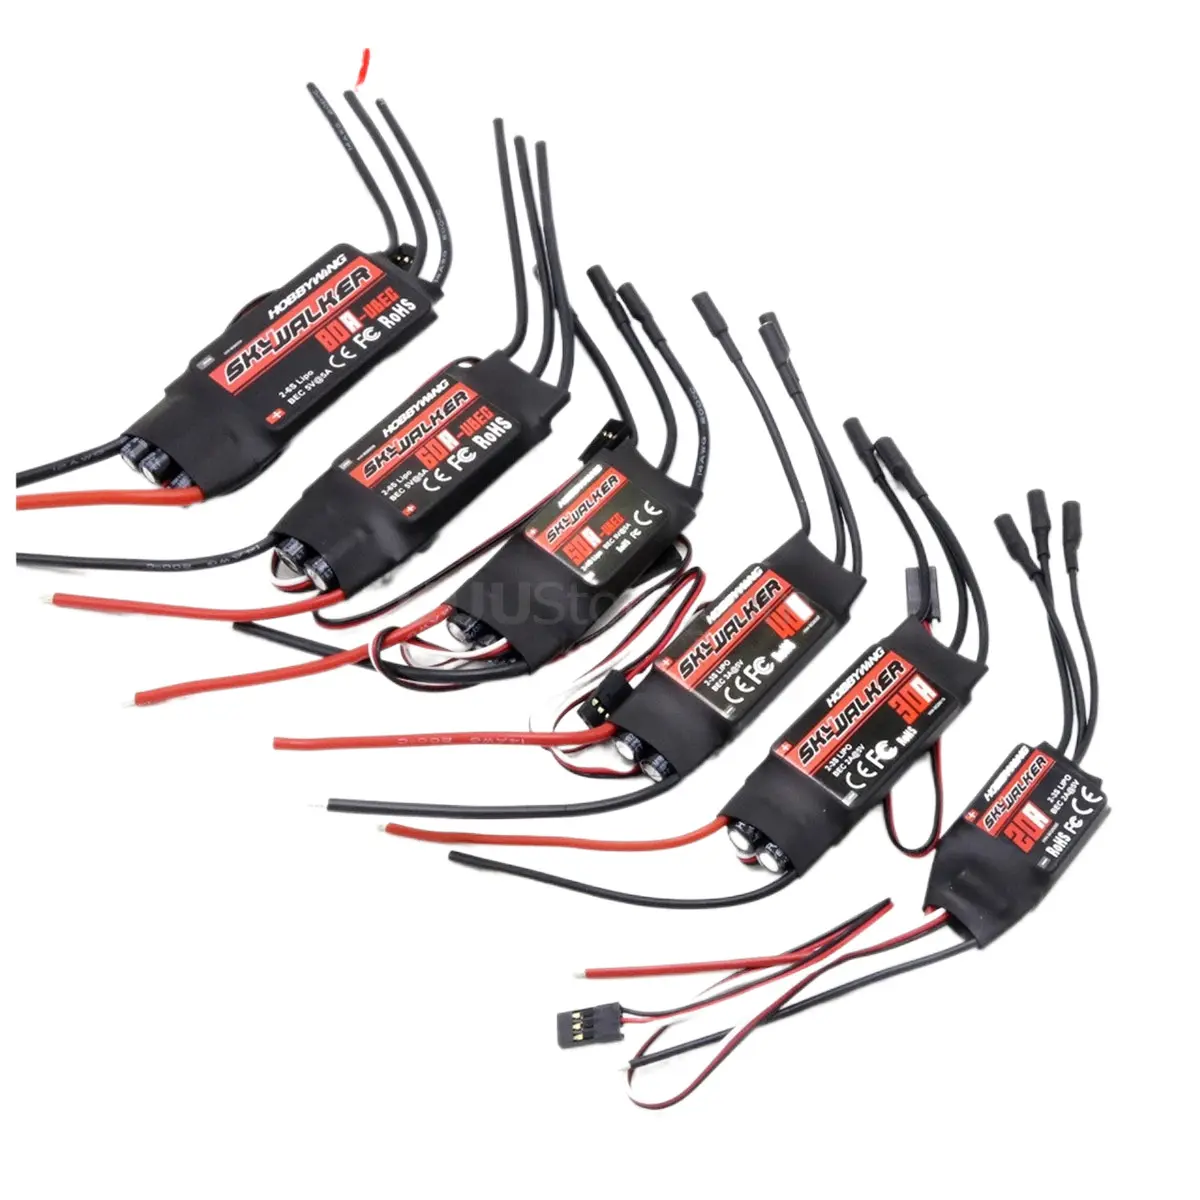 Hobbywing SkyWalker 15A 20A 30A 40A 50A 60A 80A ESC Brushless Speed Controller With BEC For RC FPV Quadcopter Skywalker Airplane